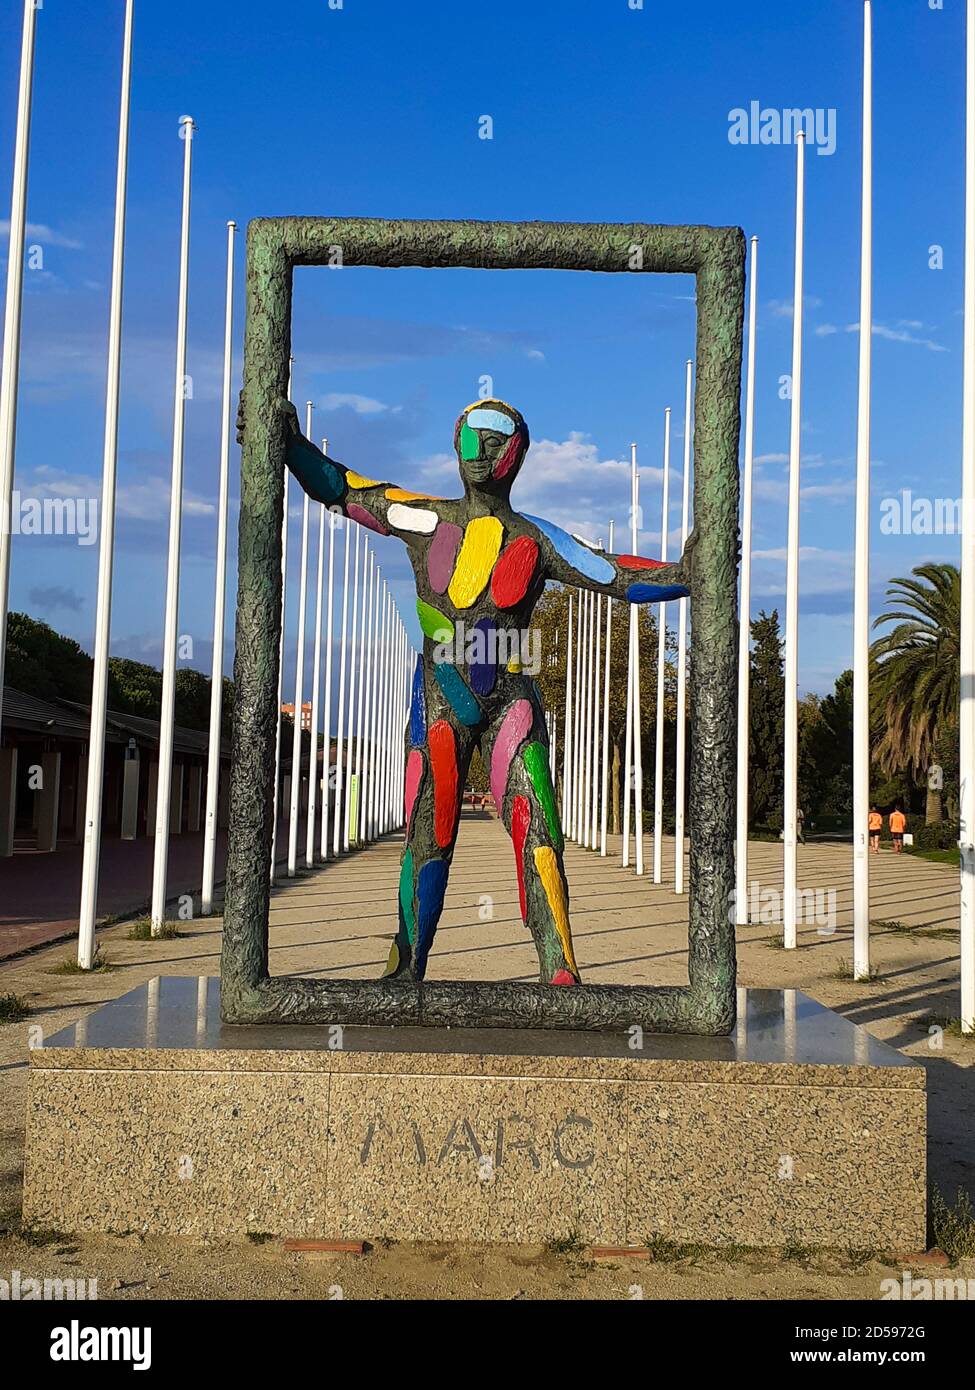 'El Marc' (the frame), sculpture by Robert Llimós, a tribute to his son Marc, a replica of the sculpture located in Atlanta. Stock Photo